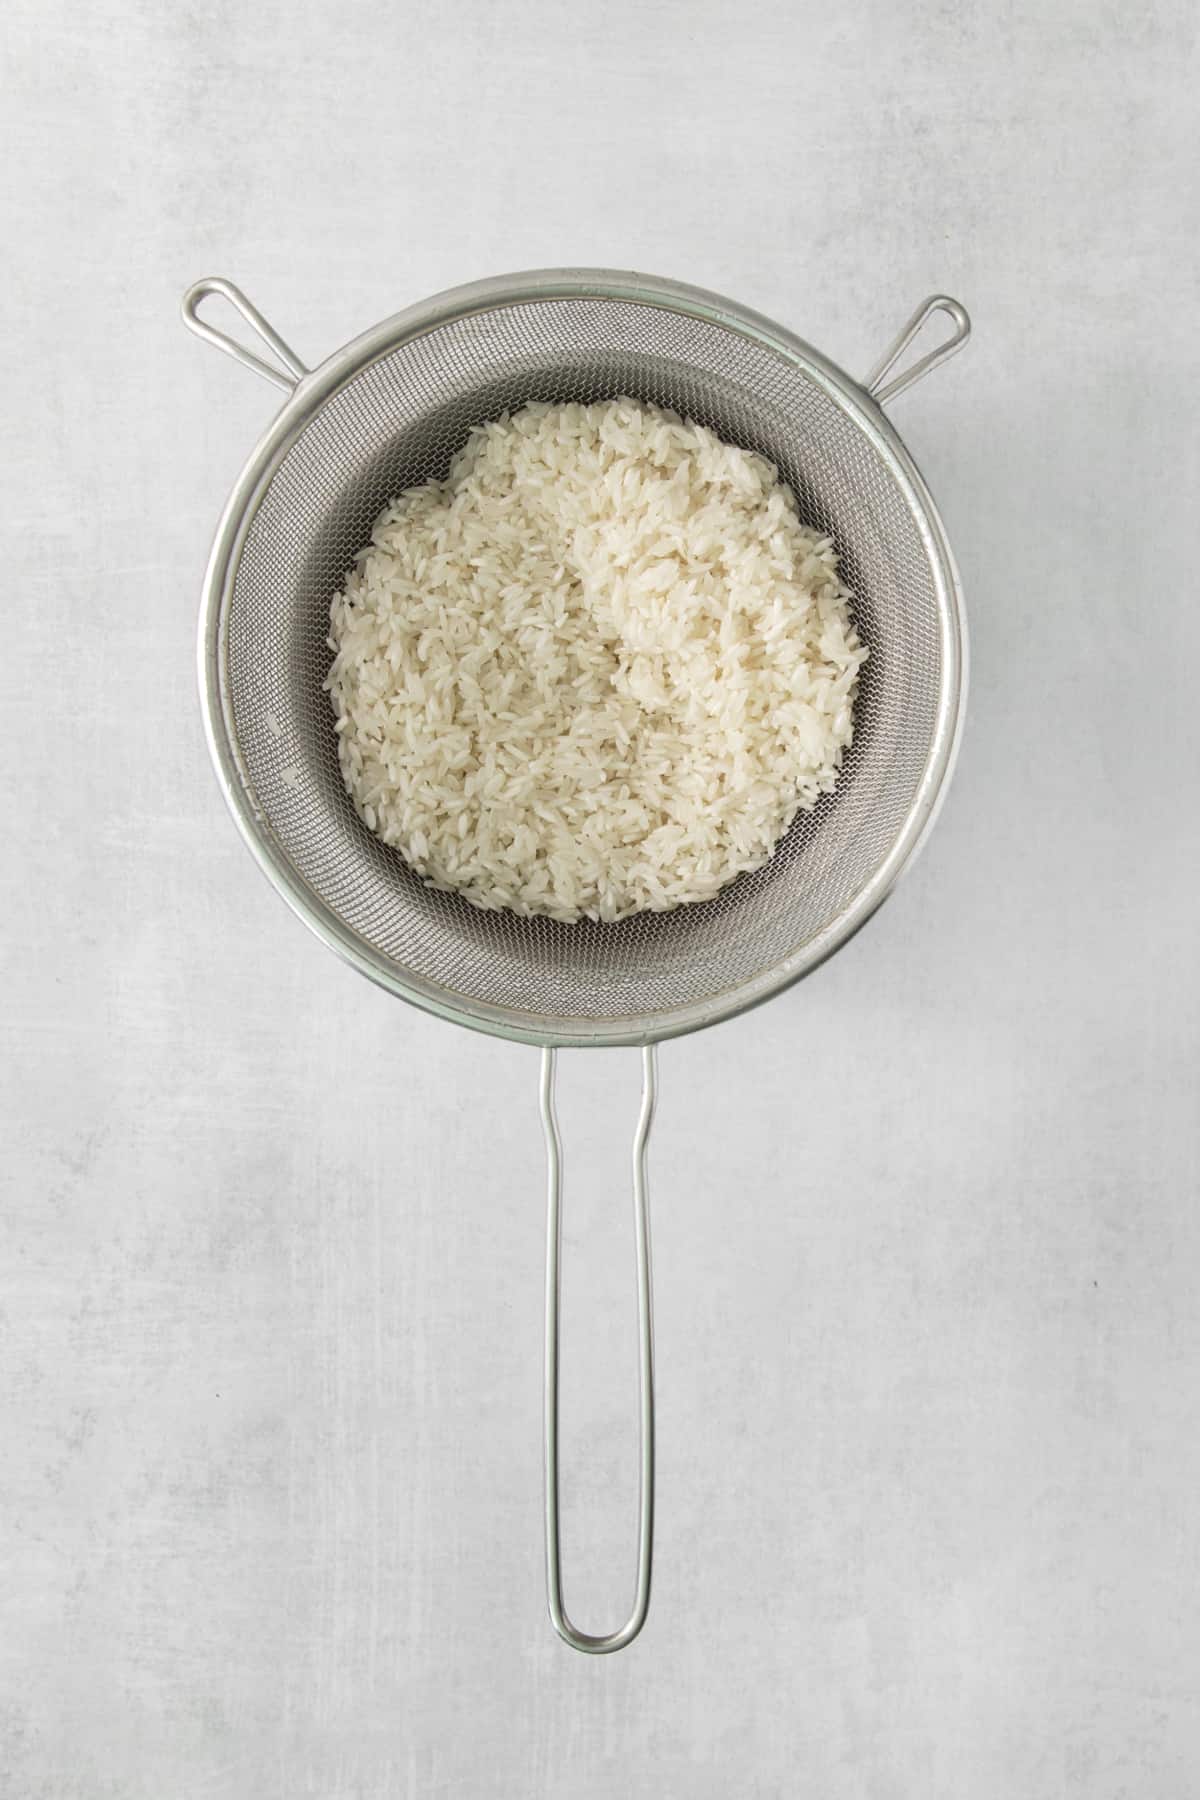 rice in a strainer.